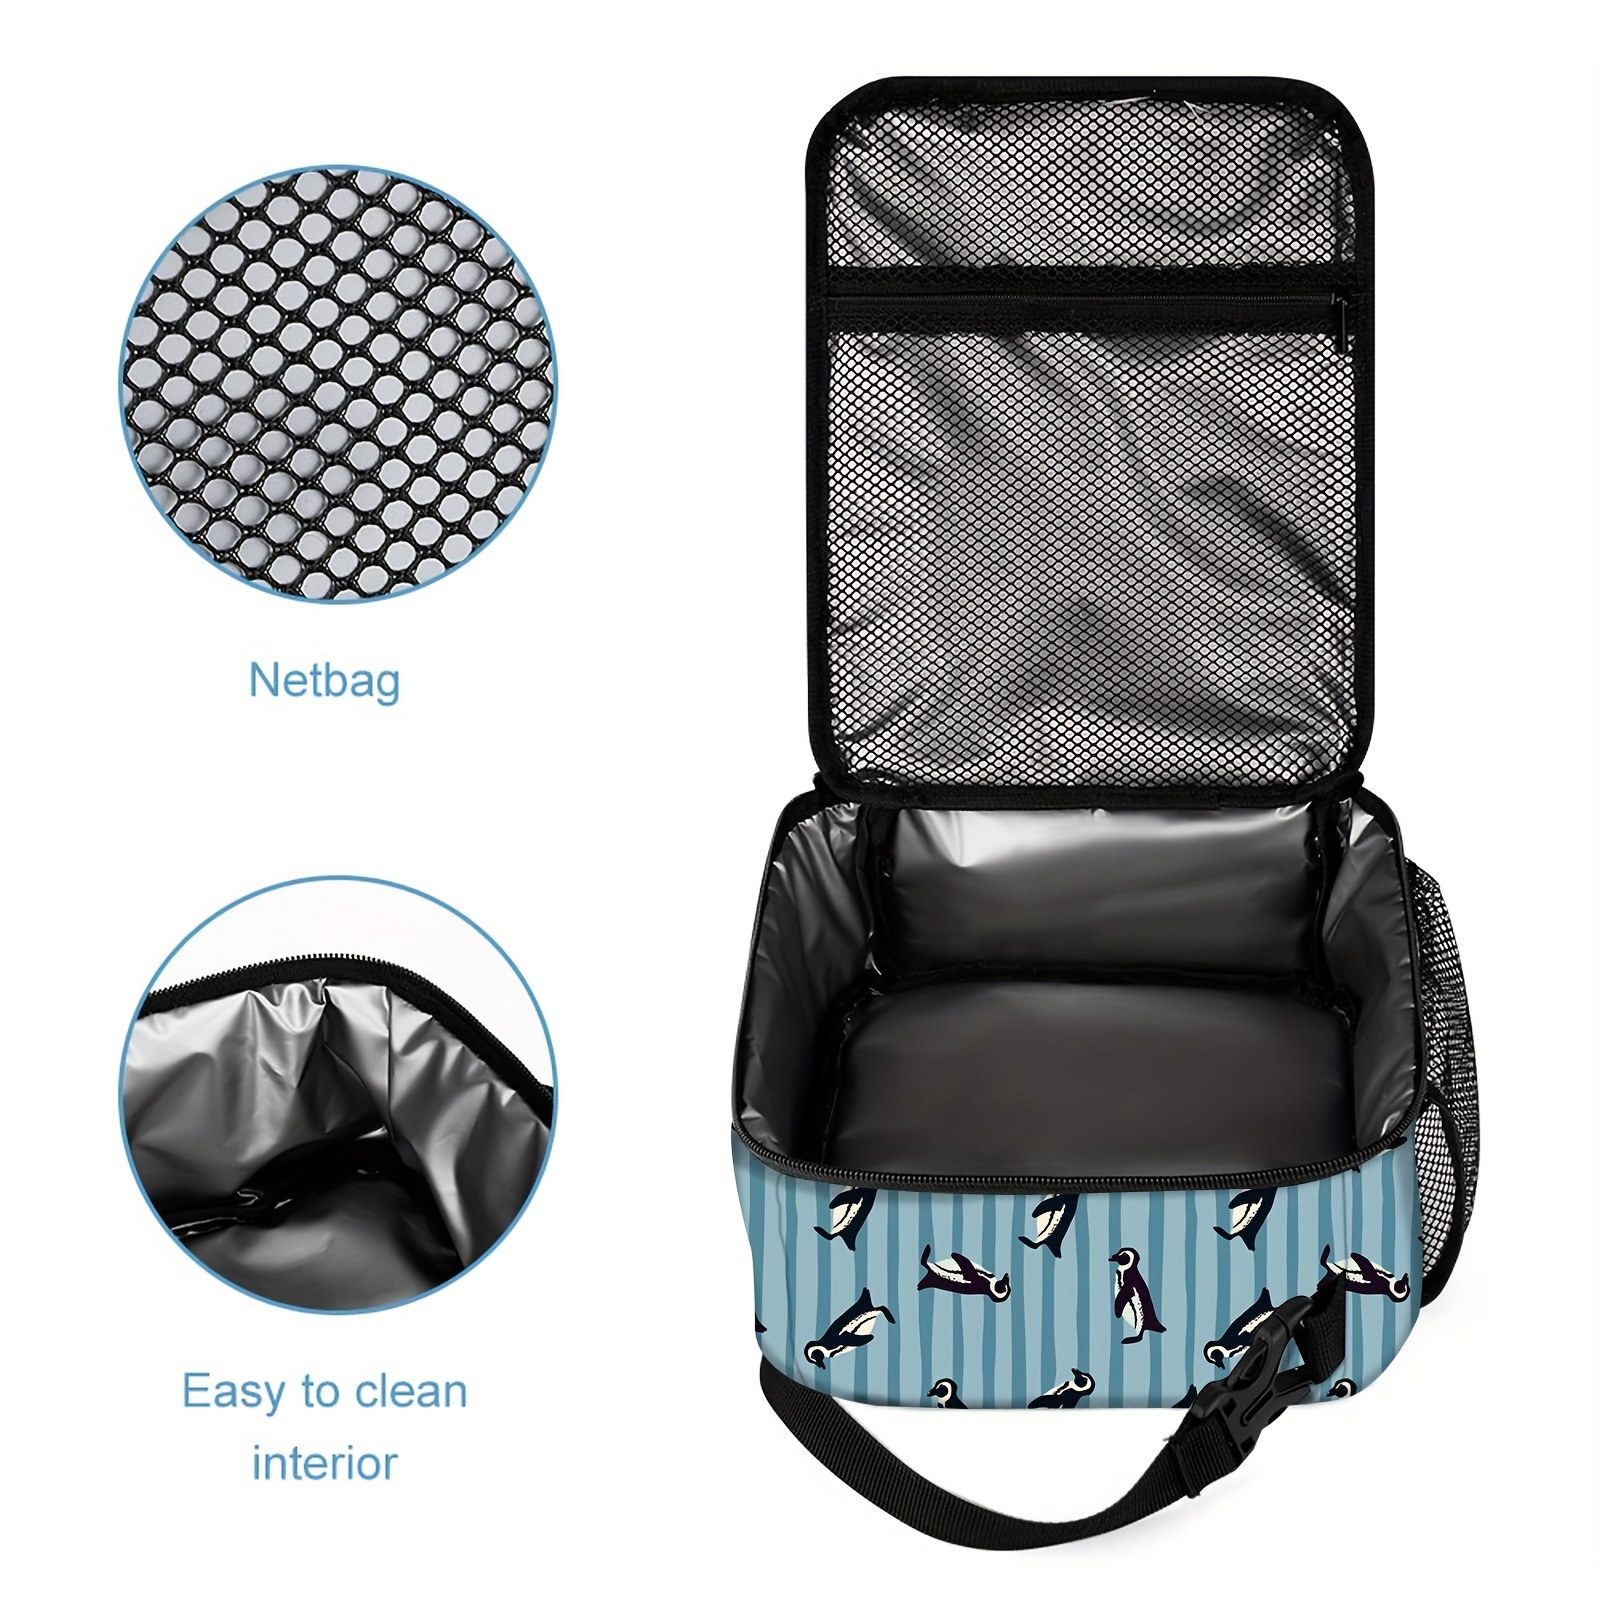 Lunch Boxes Bags Portable Printed Lightweight Insulated Cooler - Blue